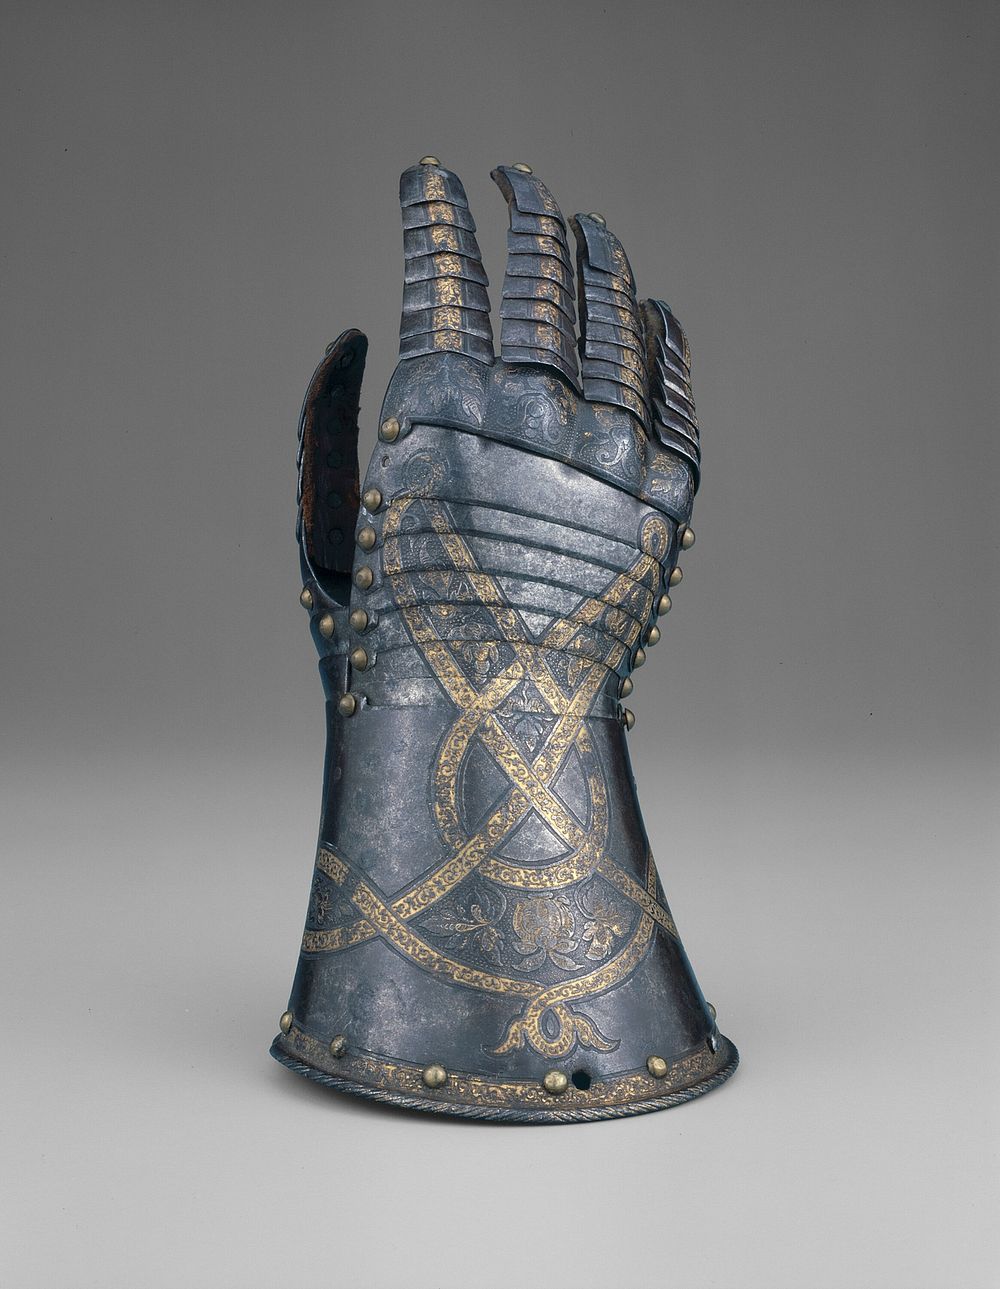 Gauntlet from a Tournament Garniture of a Hapsburg Prince by Anton Peffenhauser